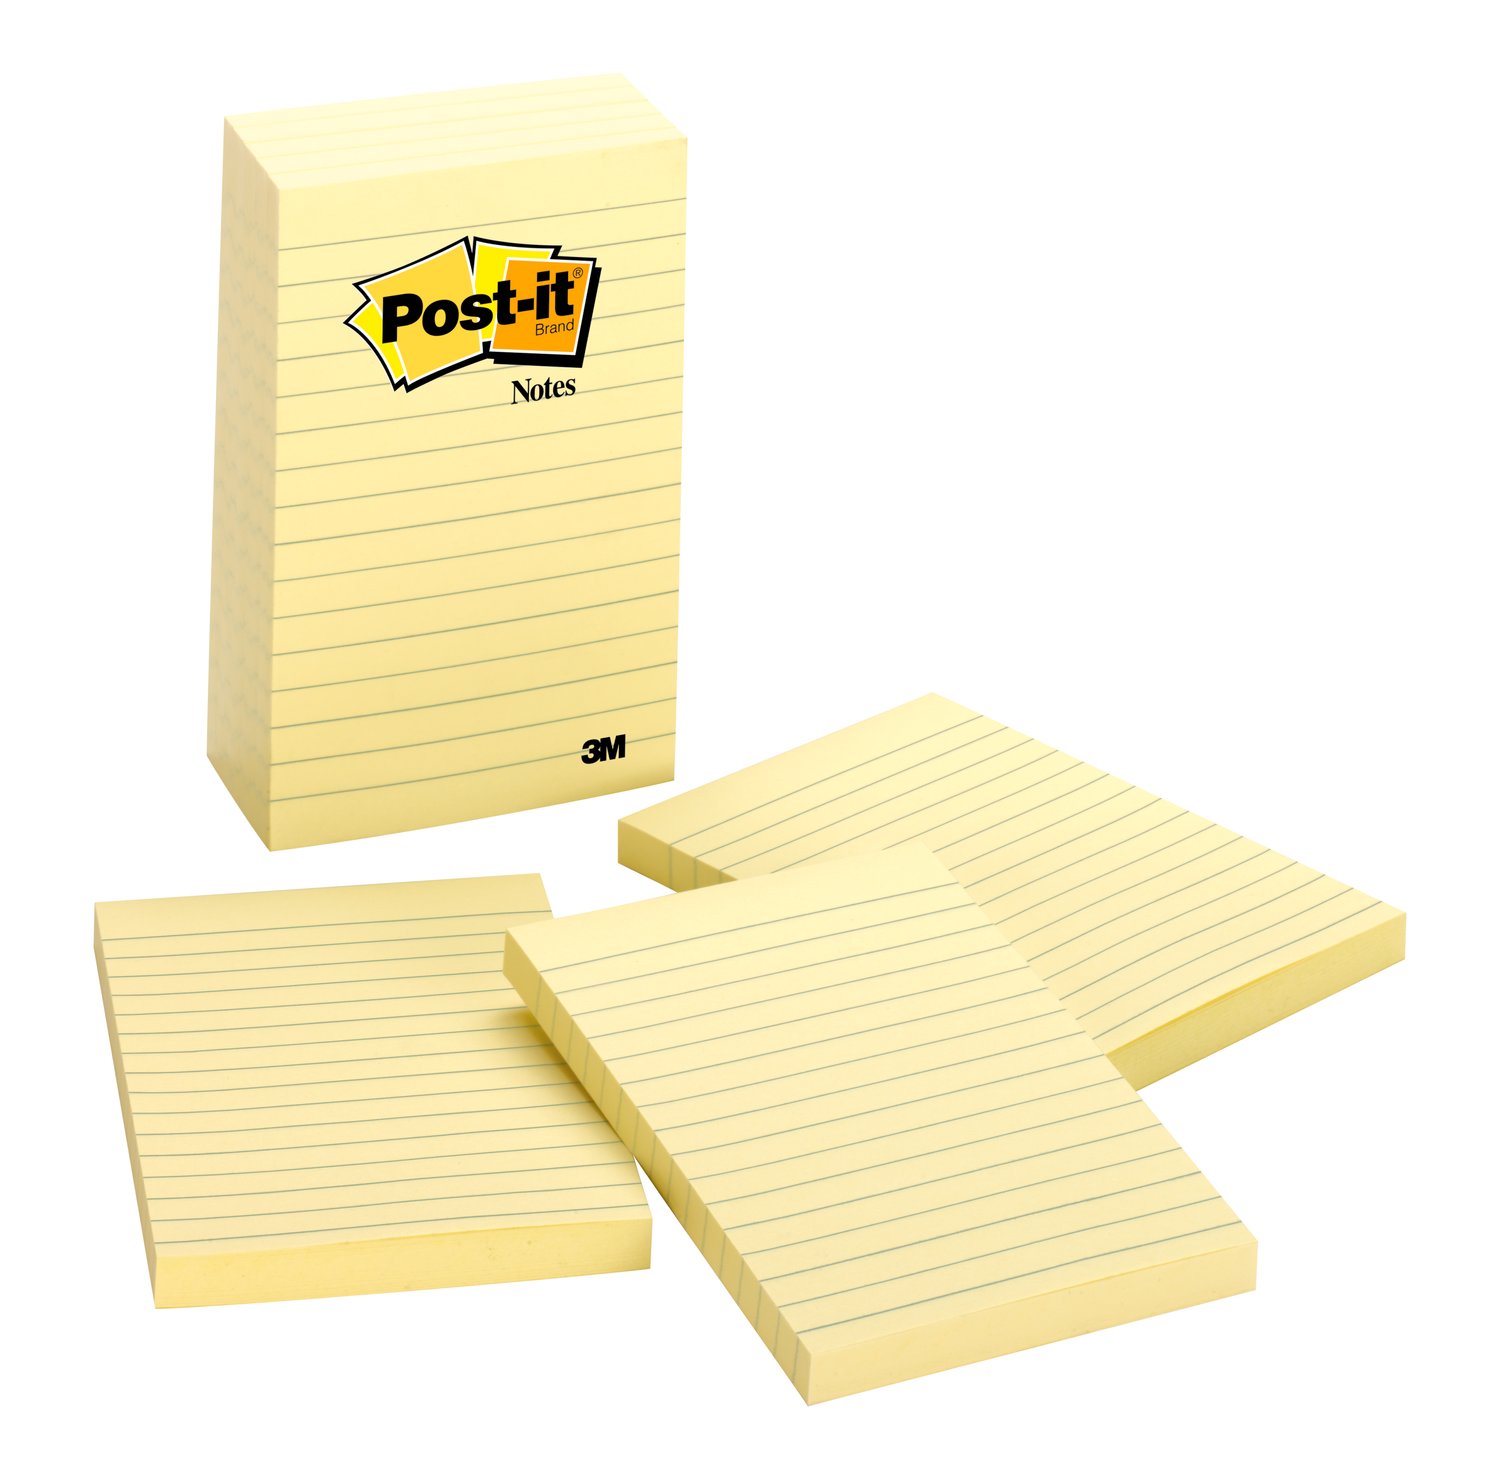 7010314440 - Post-it Notes 660-5PK 4 in x 6 in (10.16 cm x 15.24 cm) Canary Yellow,
Lined